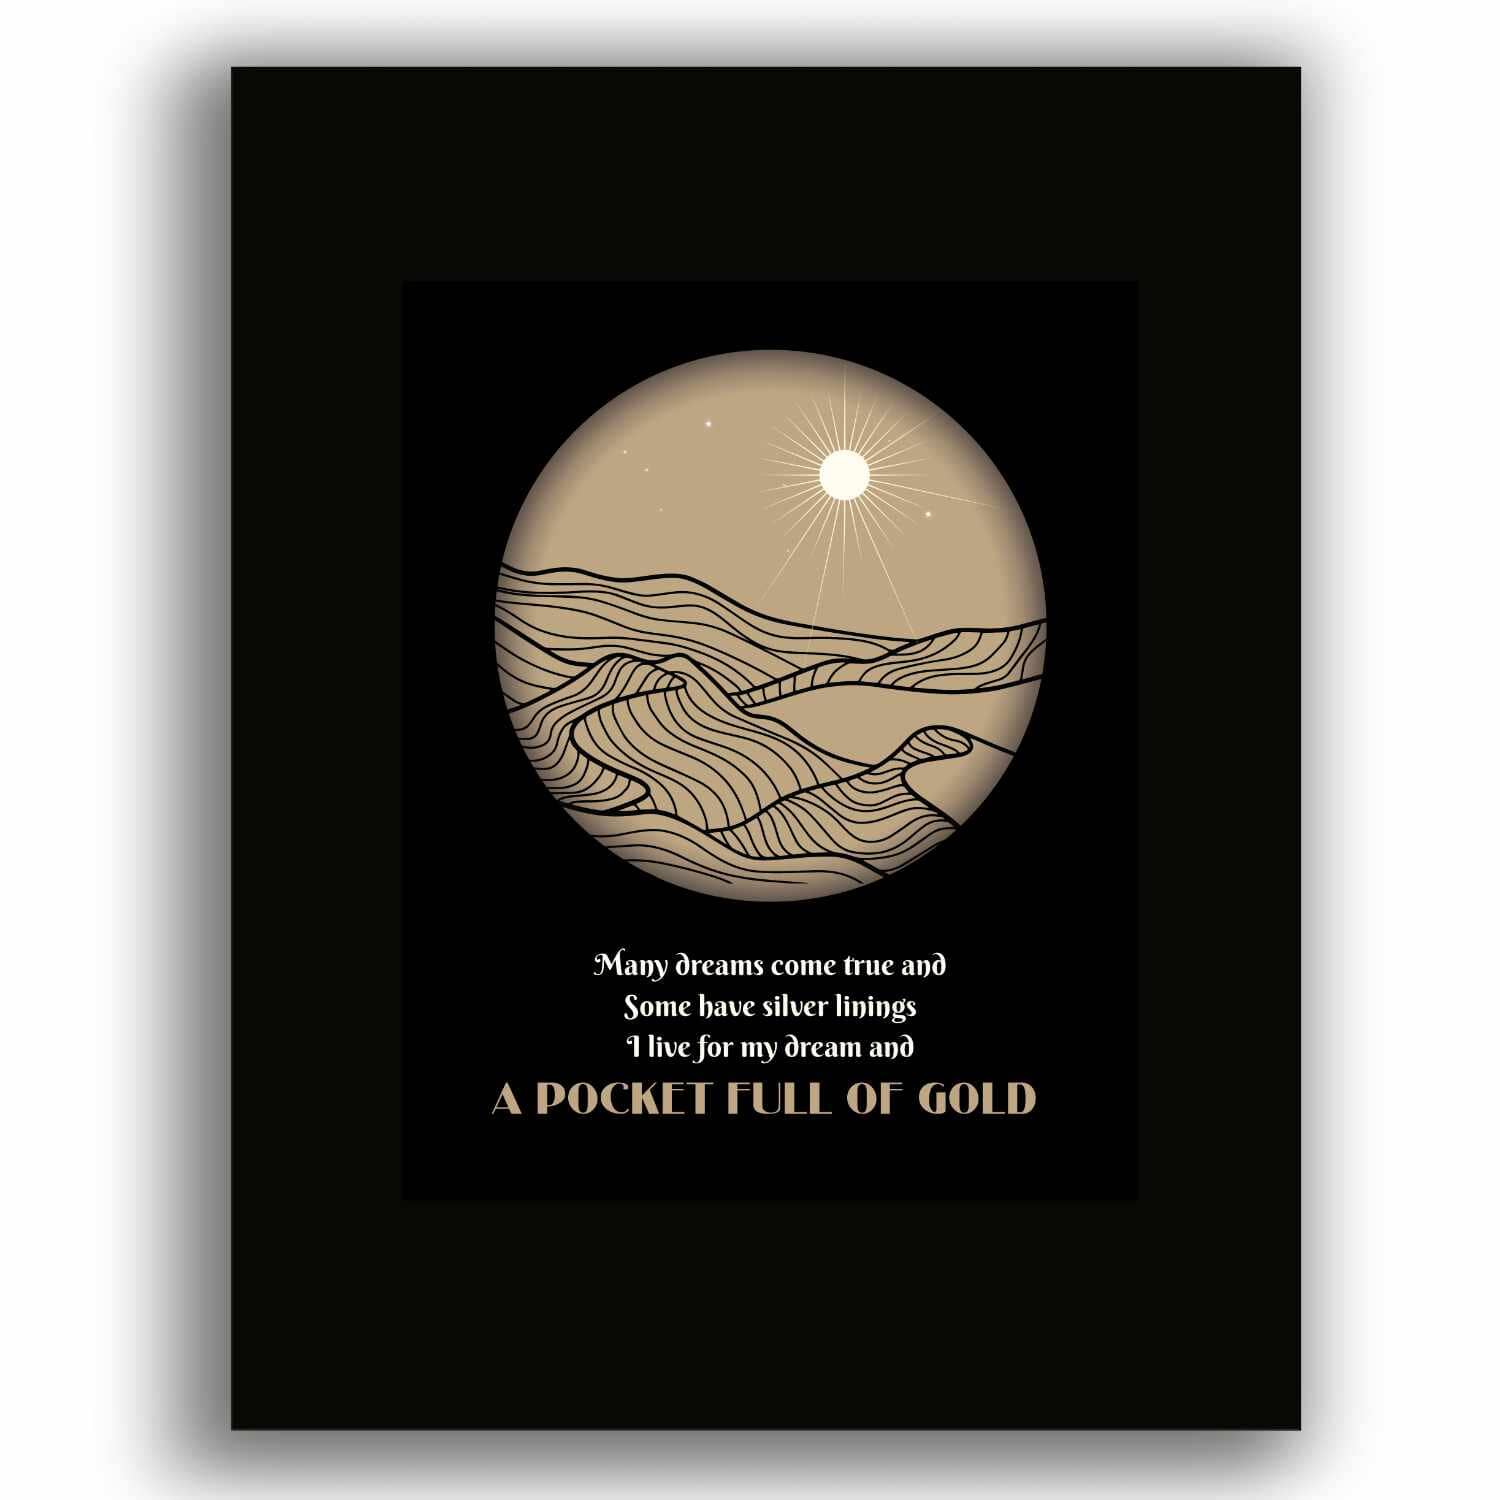 Over the Hills and Far Away by Led Zeppelin - Rock Music Art Song Lyrics Art Song Lyrics Art 8x10 Black Matted Print 